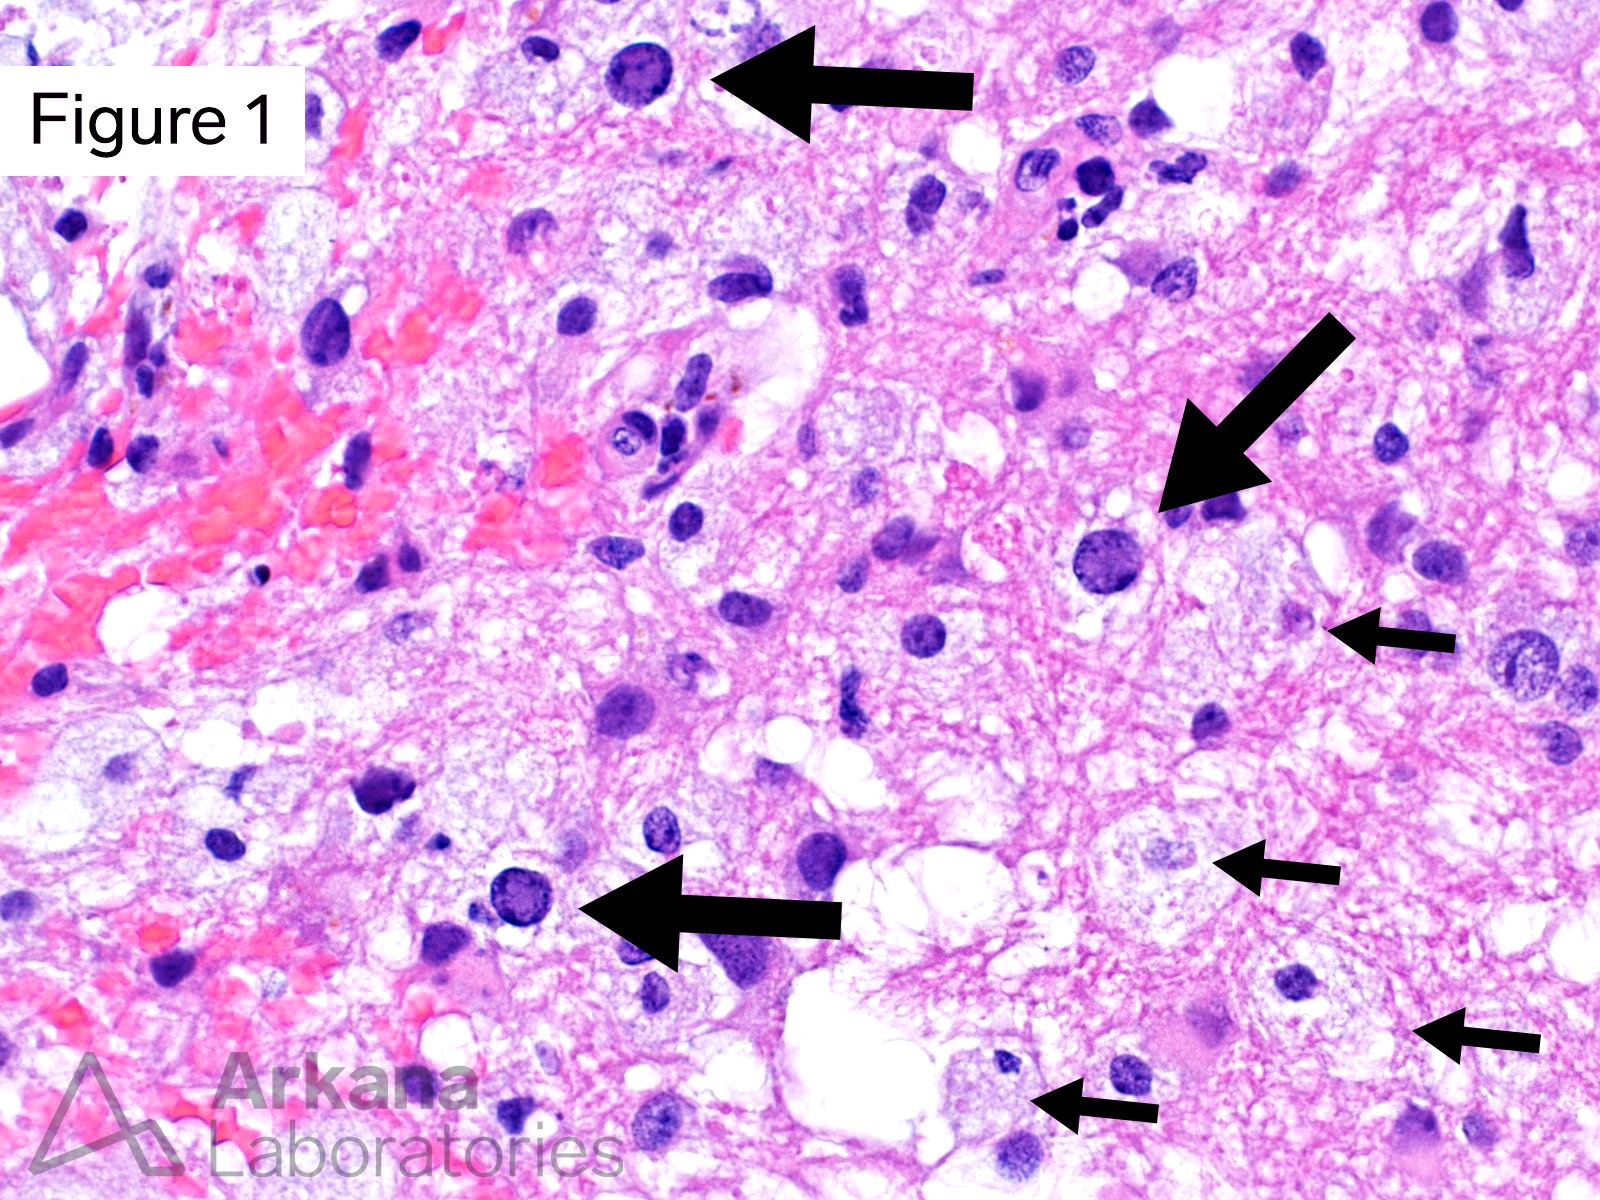 demyelinating lesion and oligodendrocytes with intranuclear viral cytopathic change on h&E stain